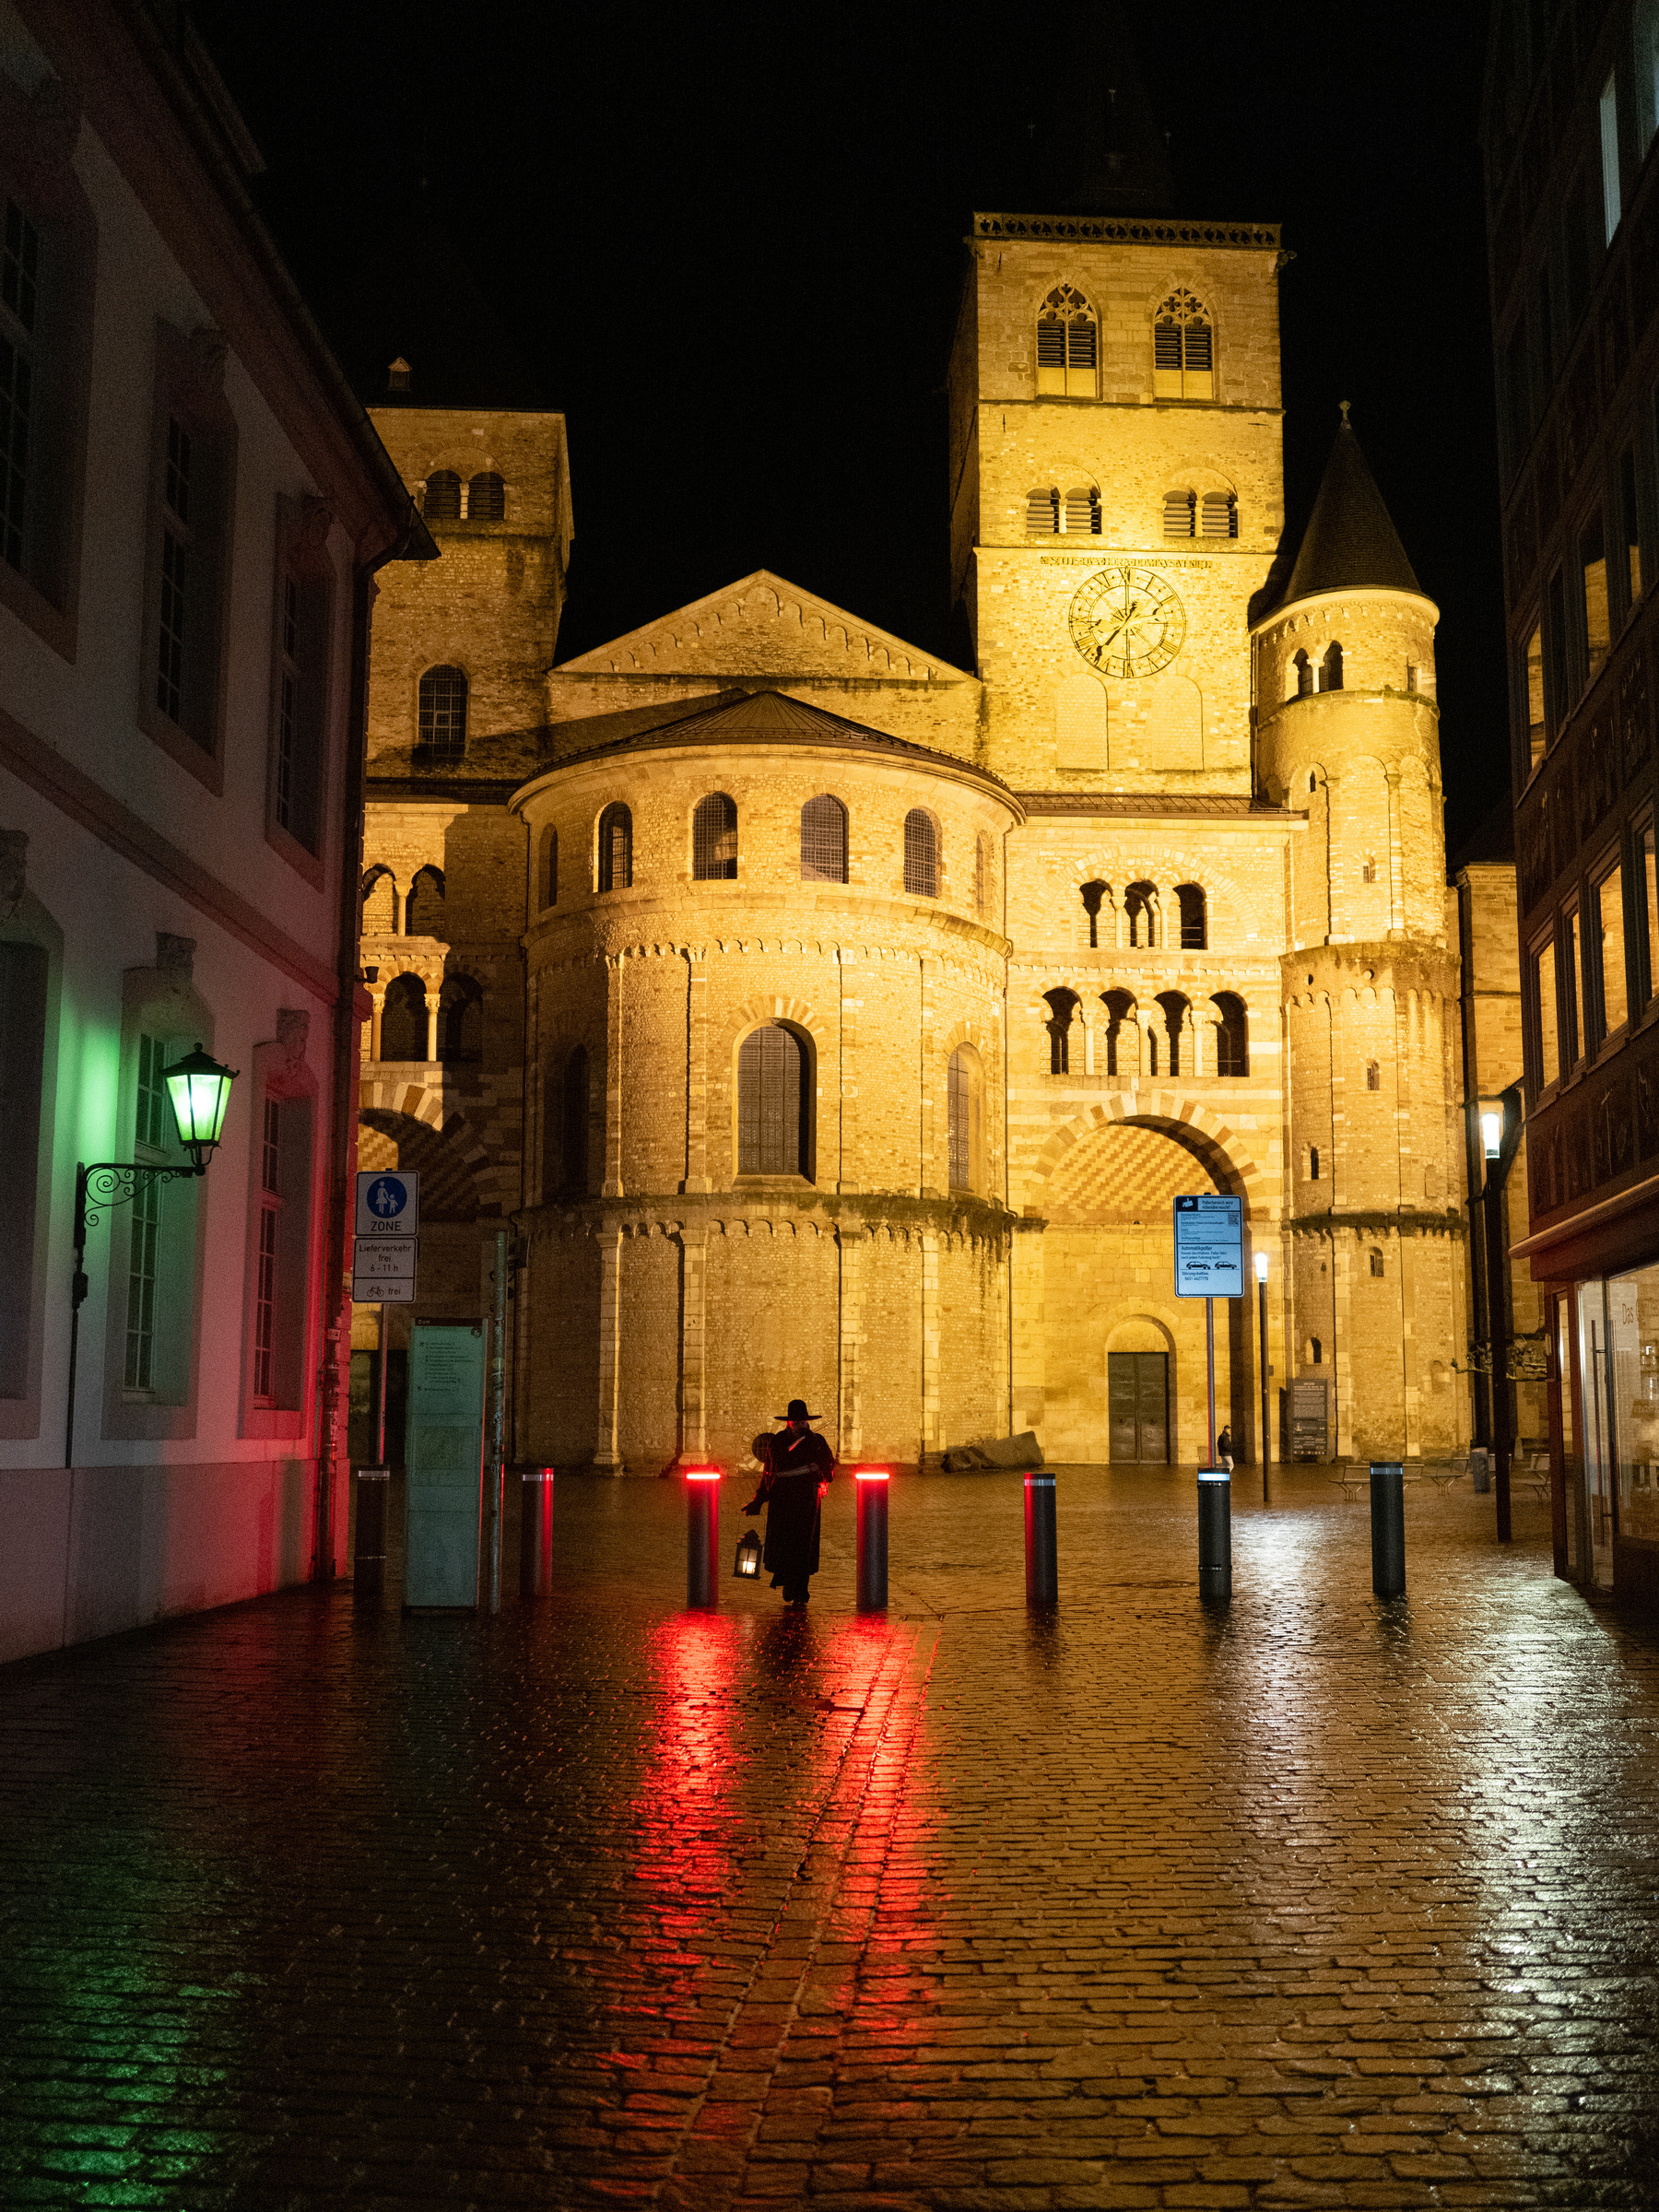 Night time scene. The cathedral of Trier and the square in front of it is visible in the background. The cathedral is lit from the outside. In the middle distance there are safety pollards separating the cathedral square and the passageway the observer is standing in. The pollards have a red light at the top and are illuminating the wet floor in front of them. Between two of the pollards a dark figure clad in a long trench coat and a wide-brimmed hat approaches. They are carrying and old lantern. 